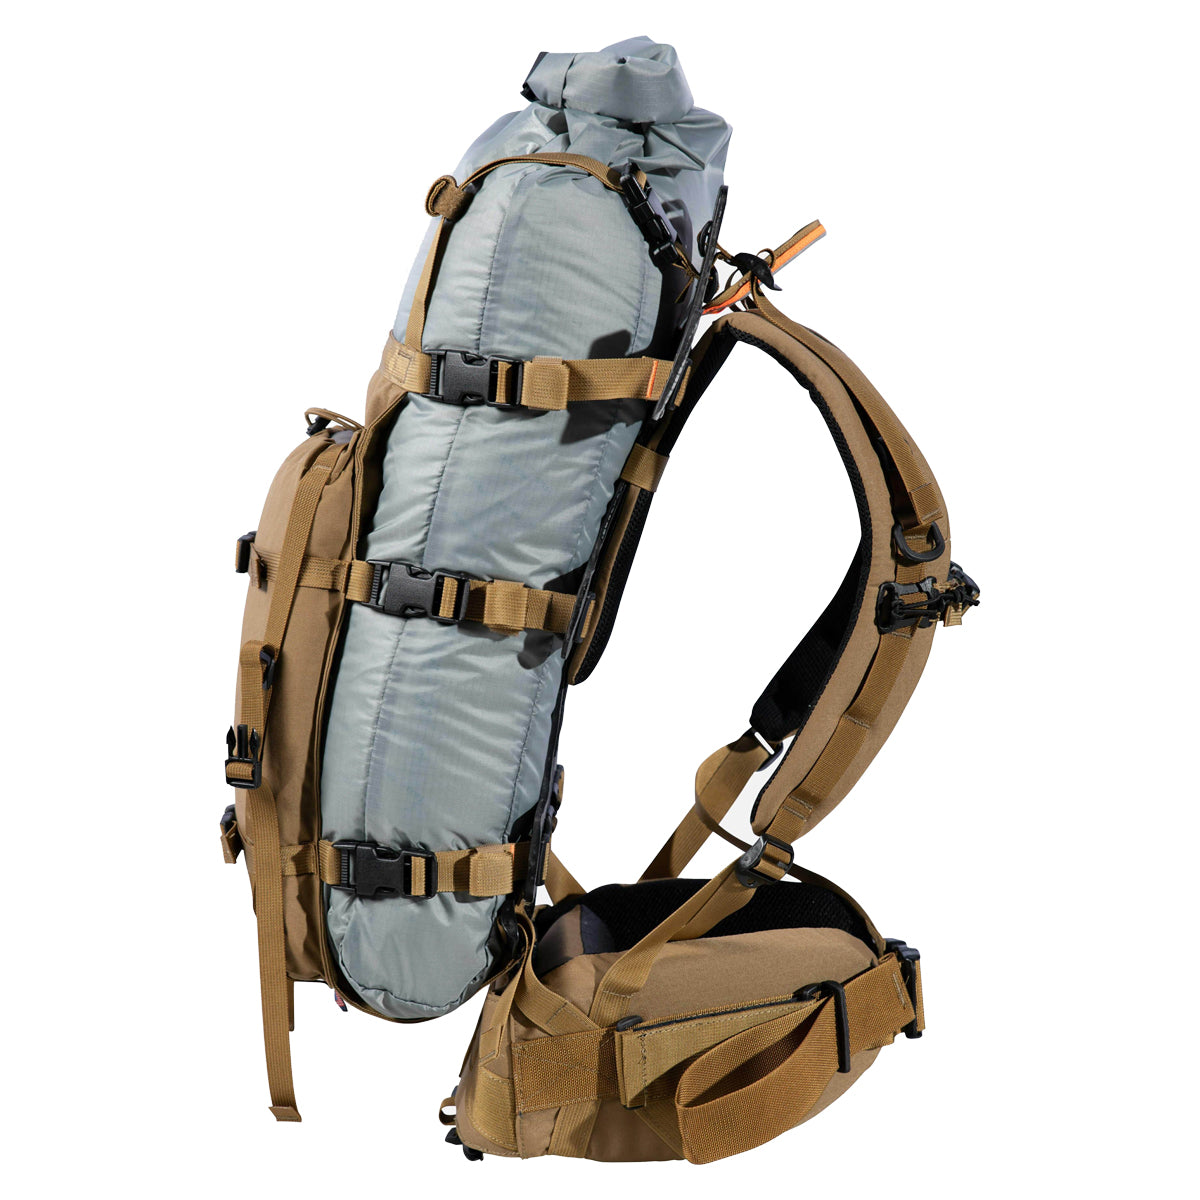 Initial Ascent Dry Bag in  by GOHUNT | Initial Ascent - GOHUNT Shop